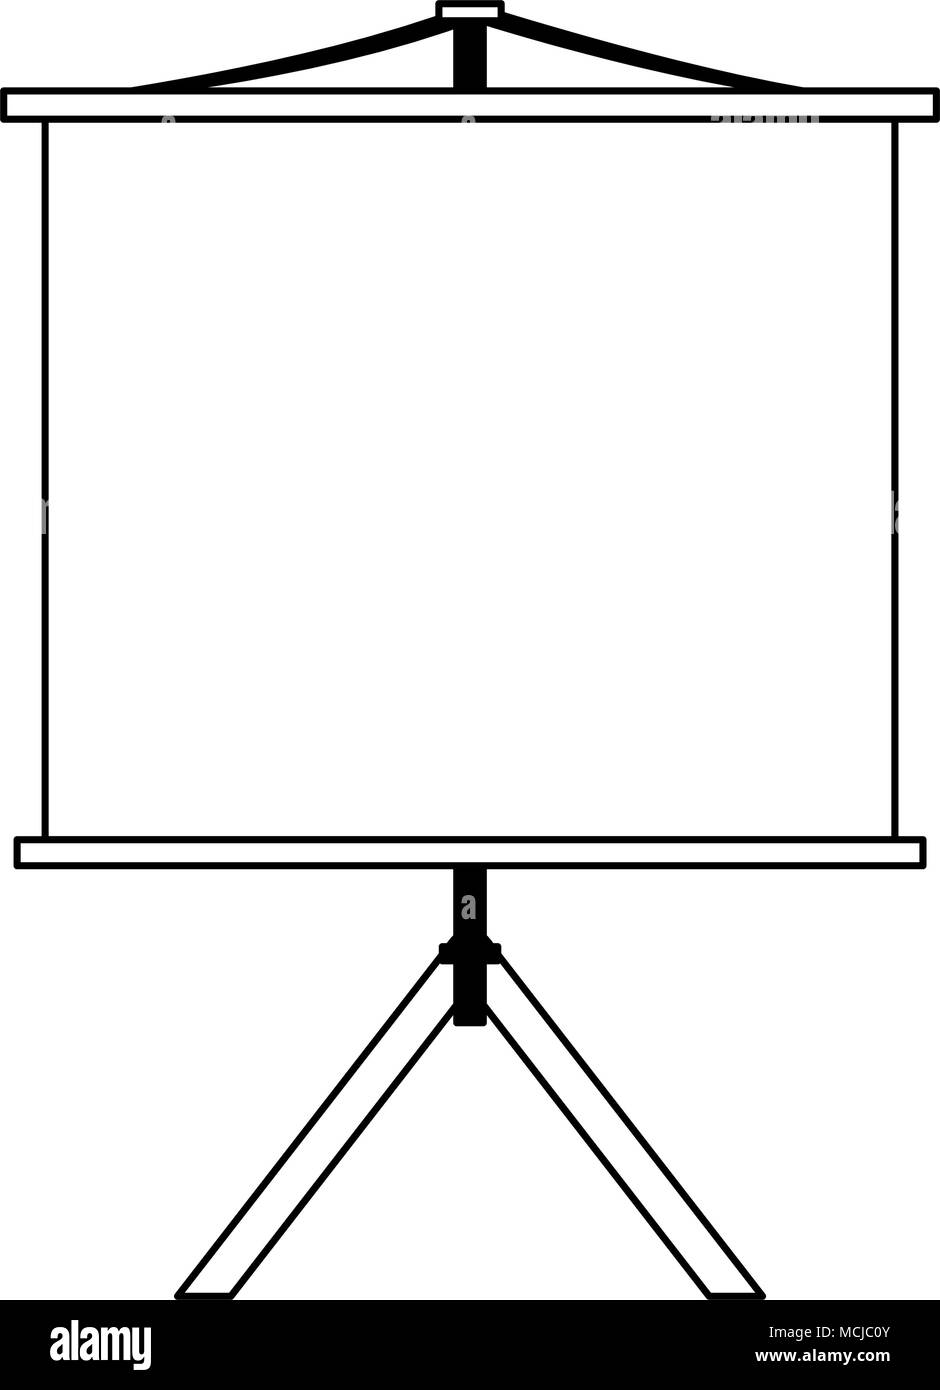 Black Board Stand Vector Design Images, White Board With Stand, Whiteboard  With Stand, Whiteboard, School PNG Image For Free Download